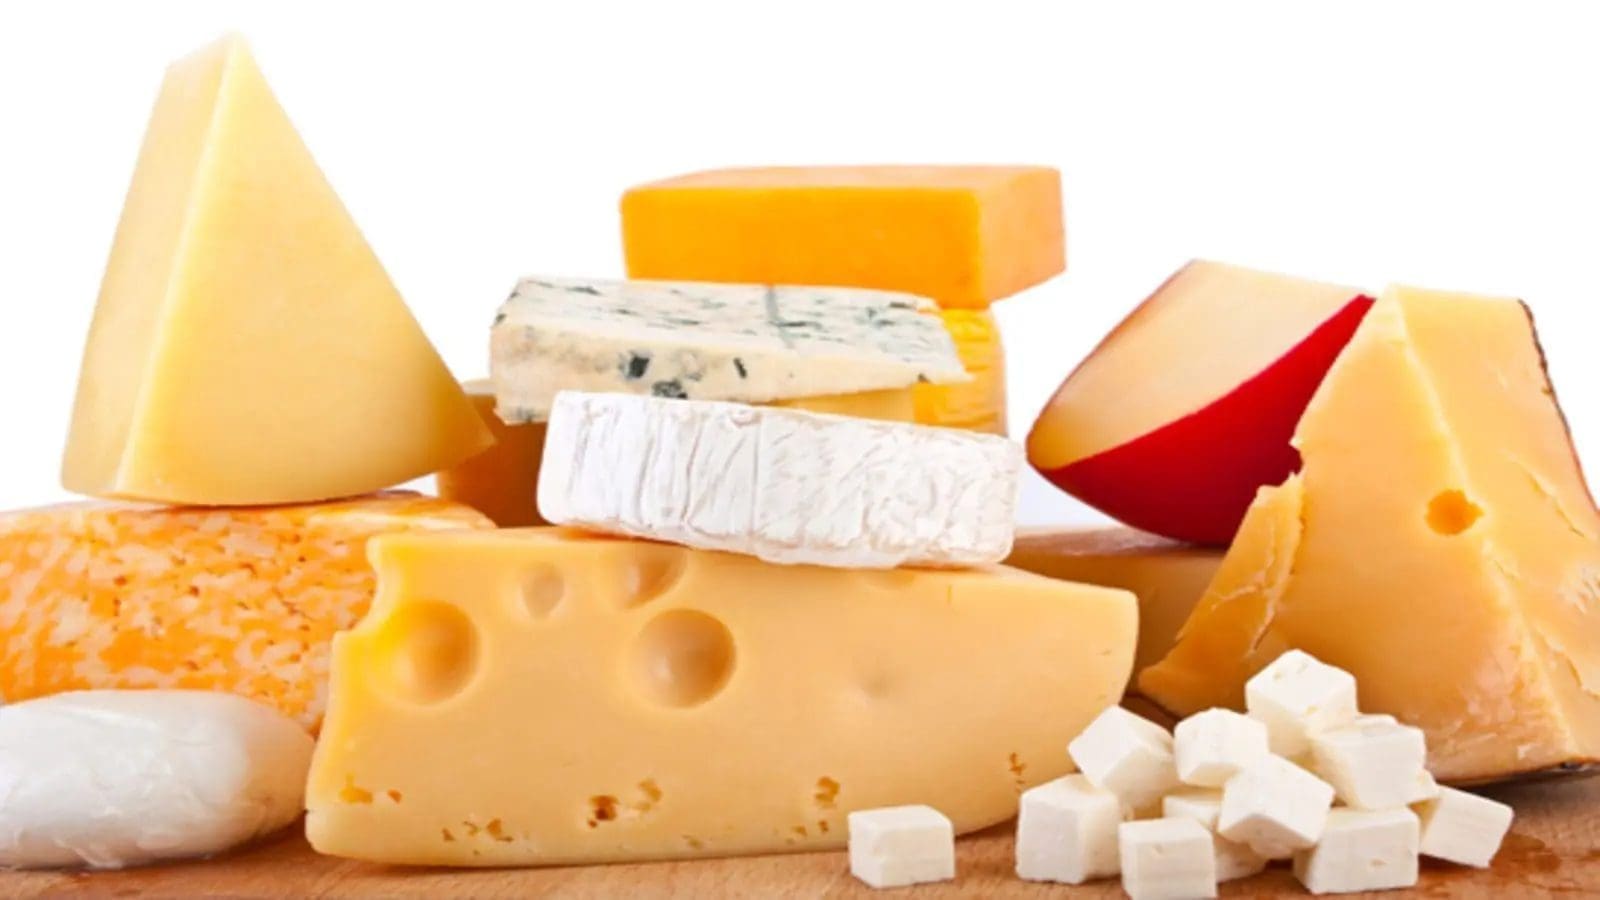 Cheese may reduce risk of dementia and lower cognitive function in older adults, new study finds